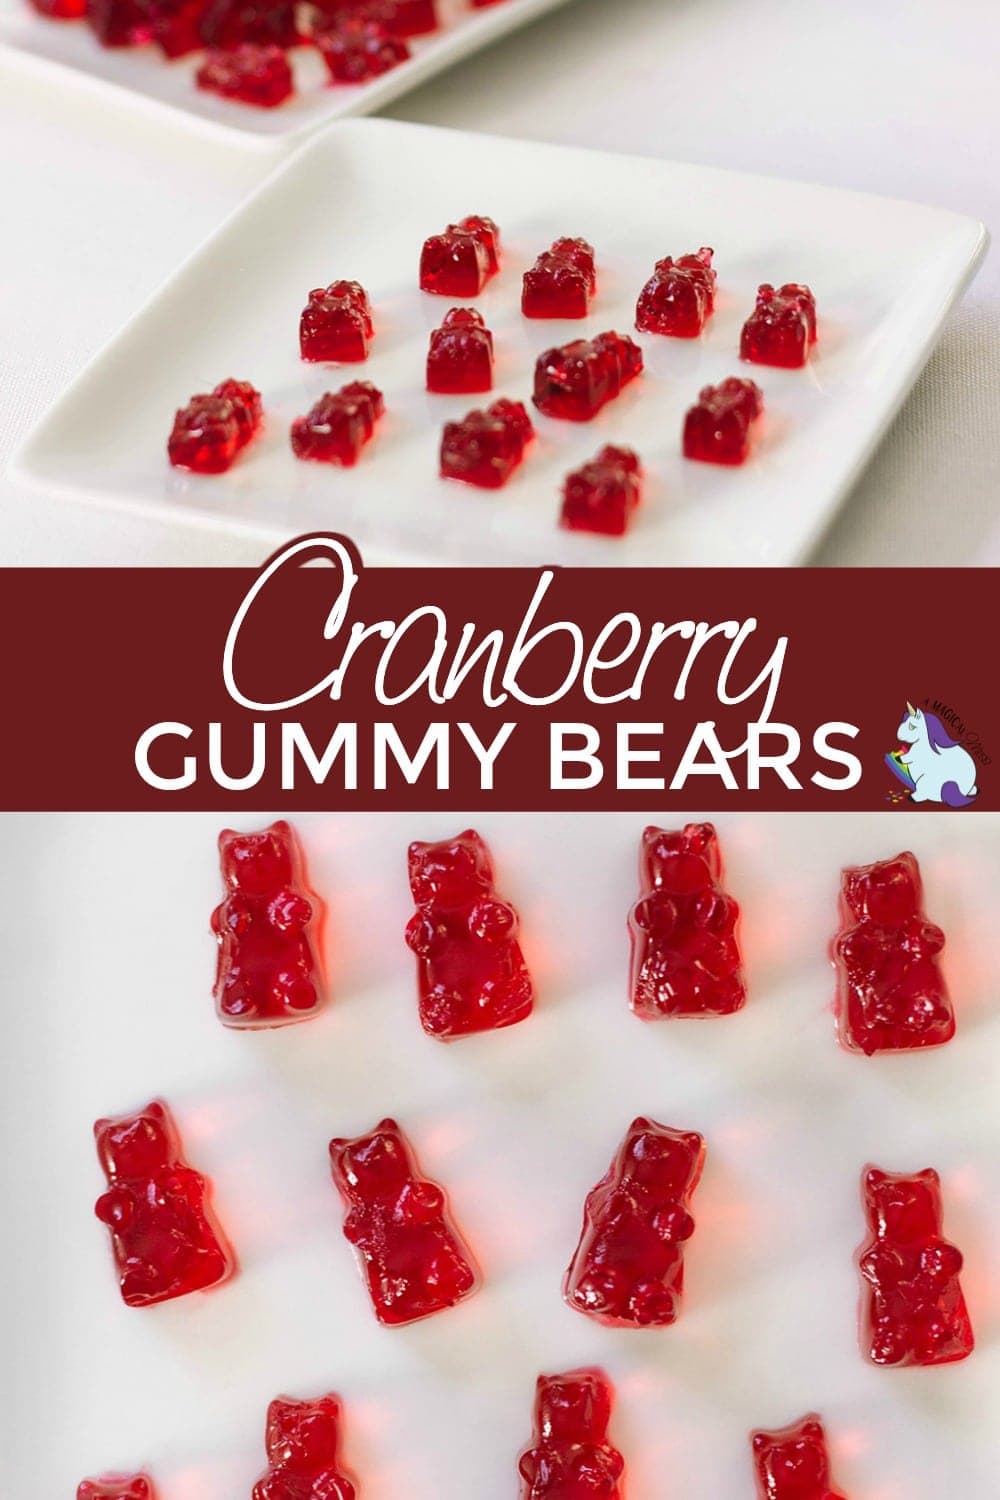 Cranberry gummy bears on a plate